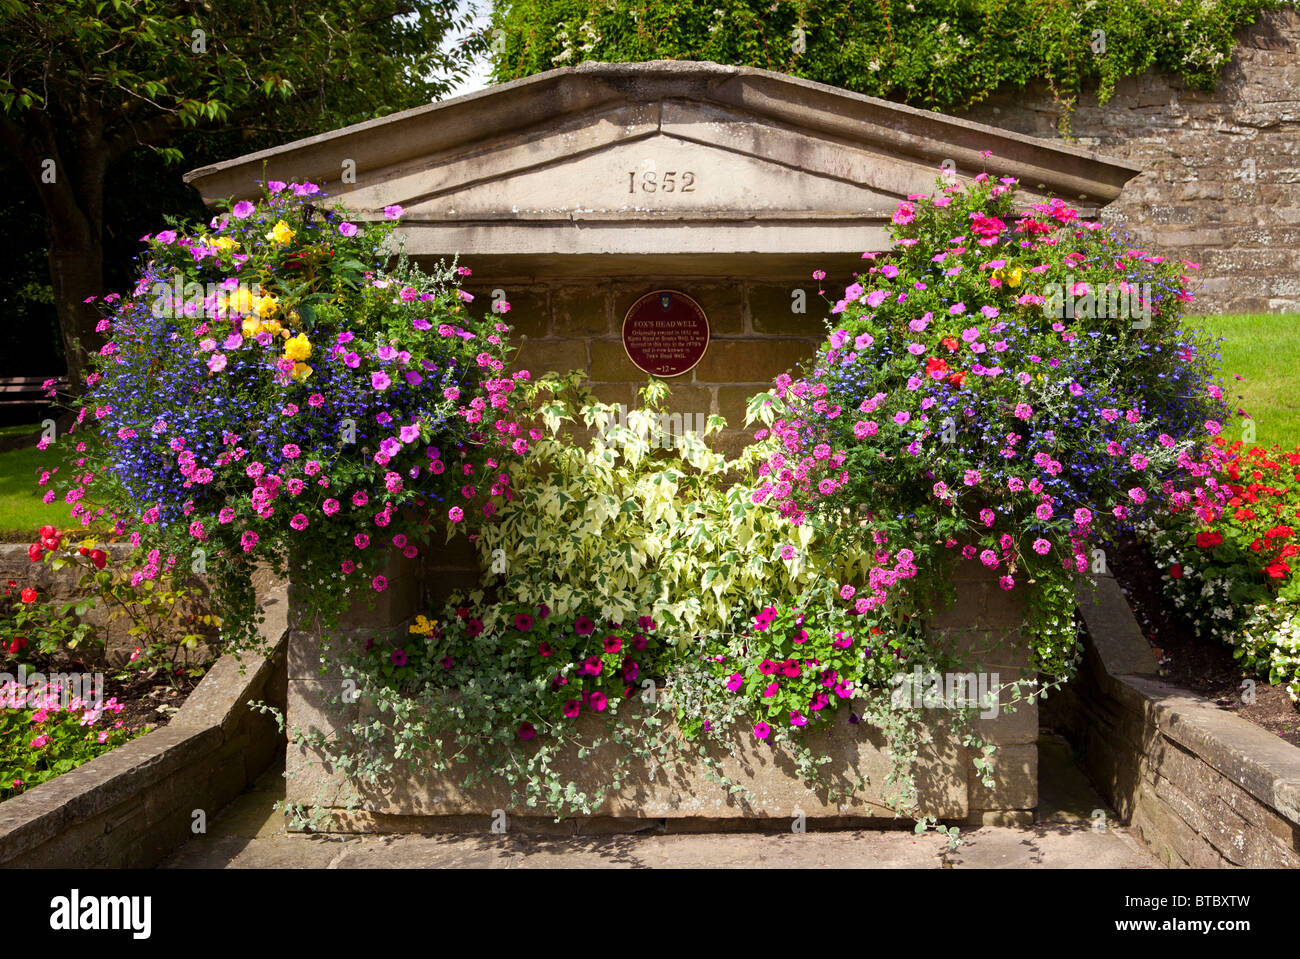 Floral display at Fox's head well, Pateley Bridge, North Yorkshire. Stock Photo